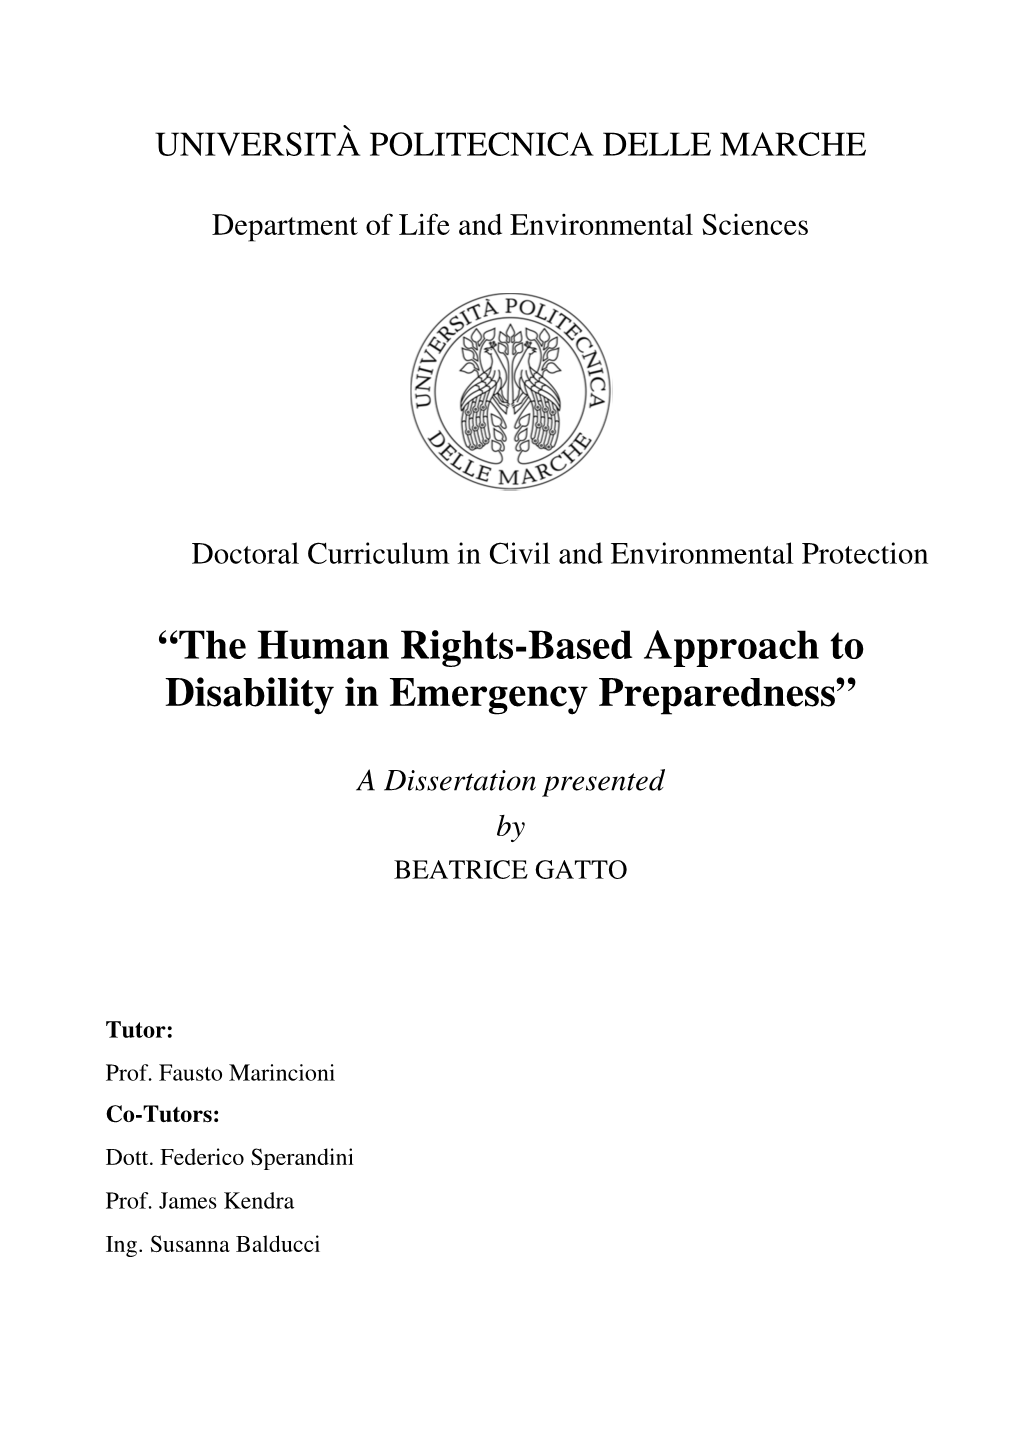 “The Human Rights-Based Approach to Disability in Emergency Preparedness”